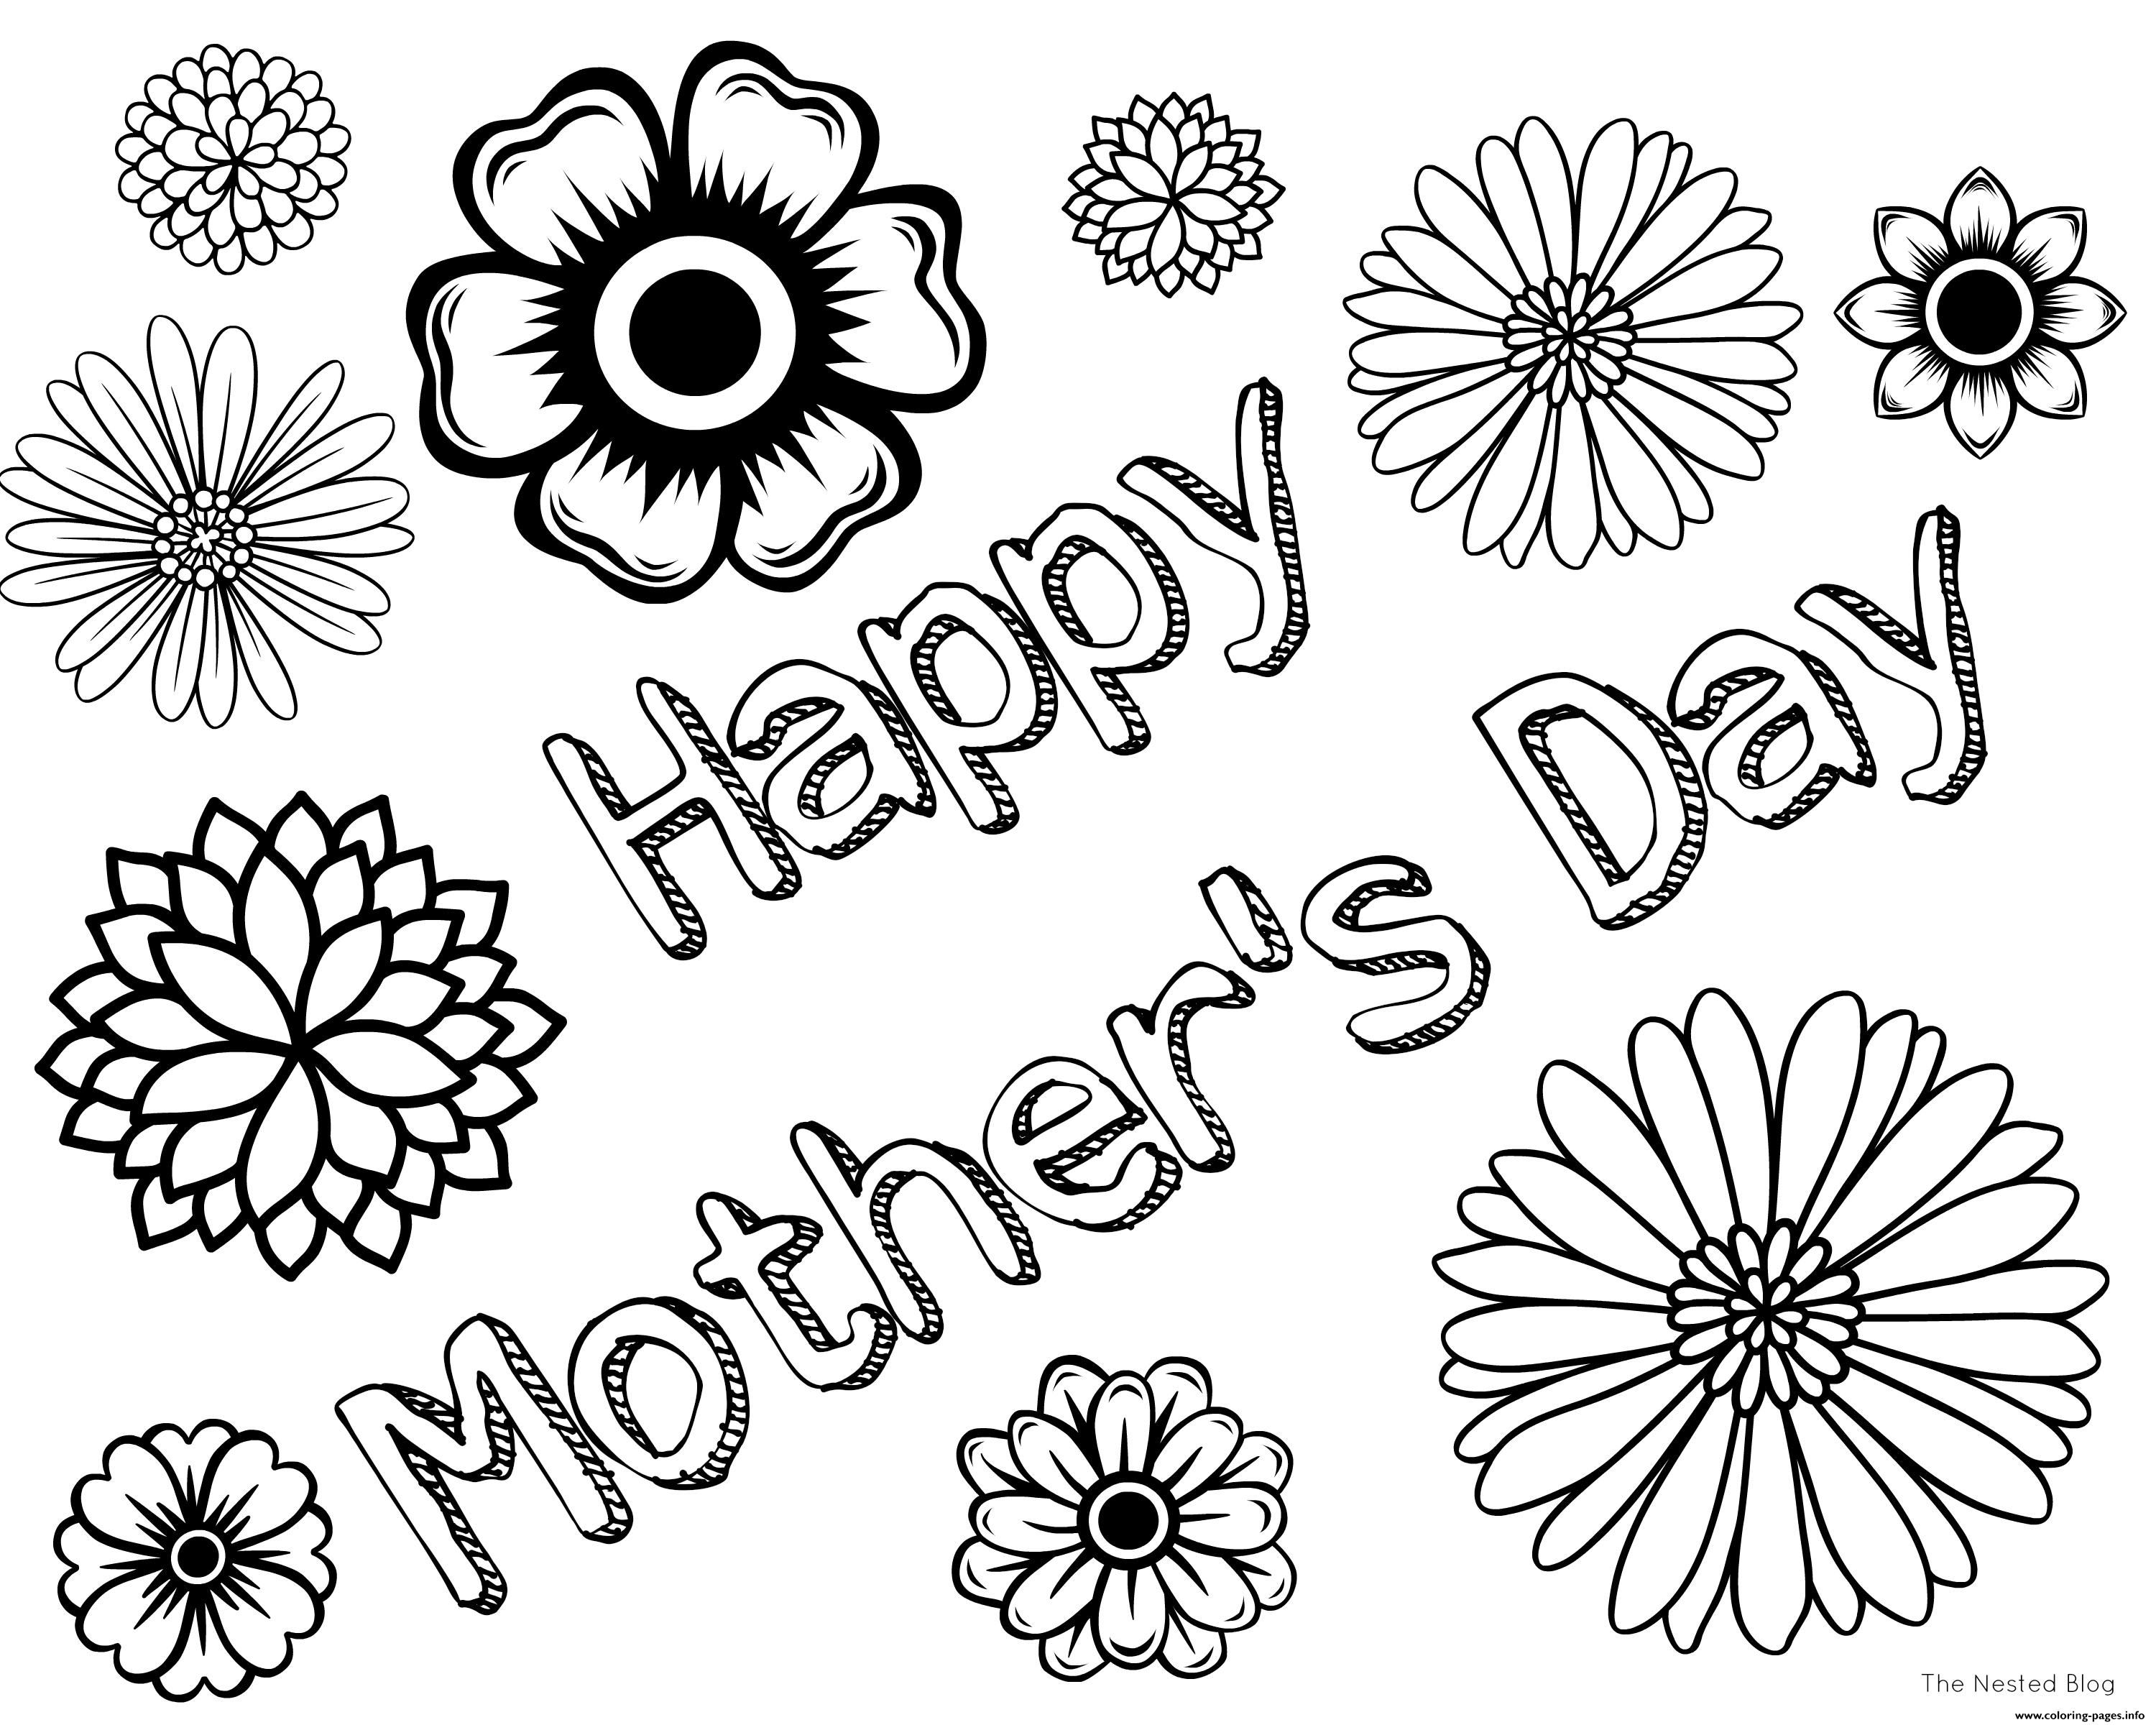 Free Mother's Day Coloring Pages Coloring Pages Coloring Pages 1494466882free Mothers Day Happy